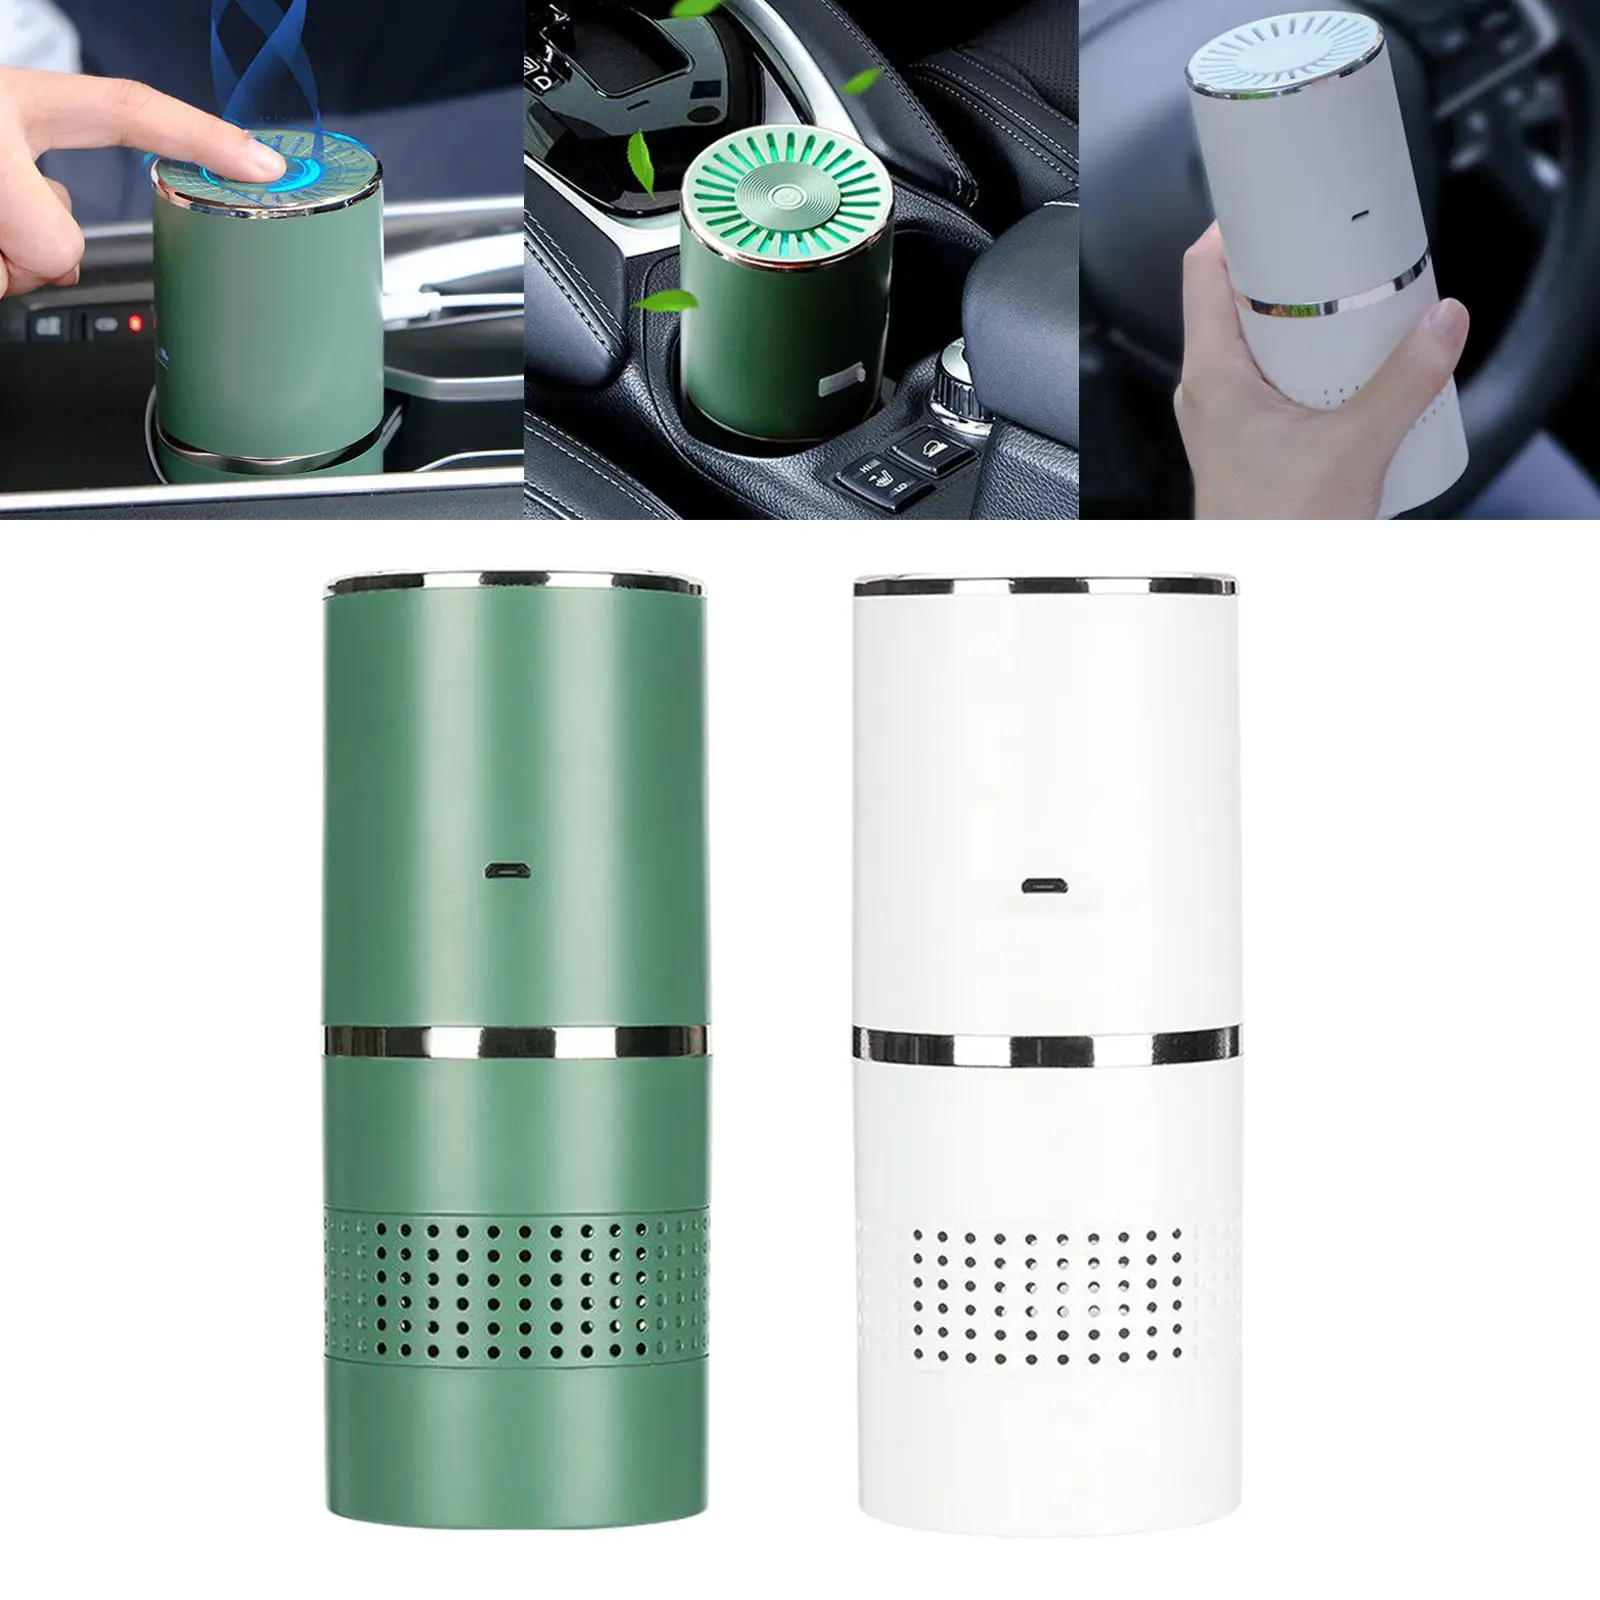 Mini Air Purifier USB Plug in Portable Desktop Air Cleaner with Night Light Low Noise Small Air Purifier